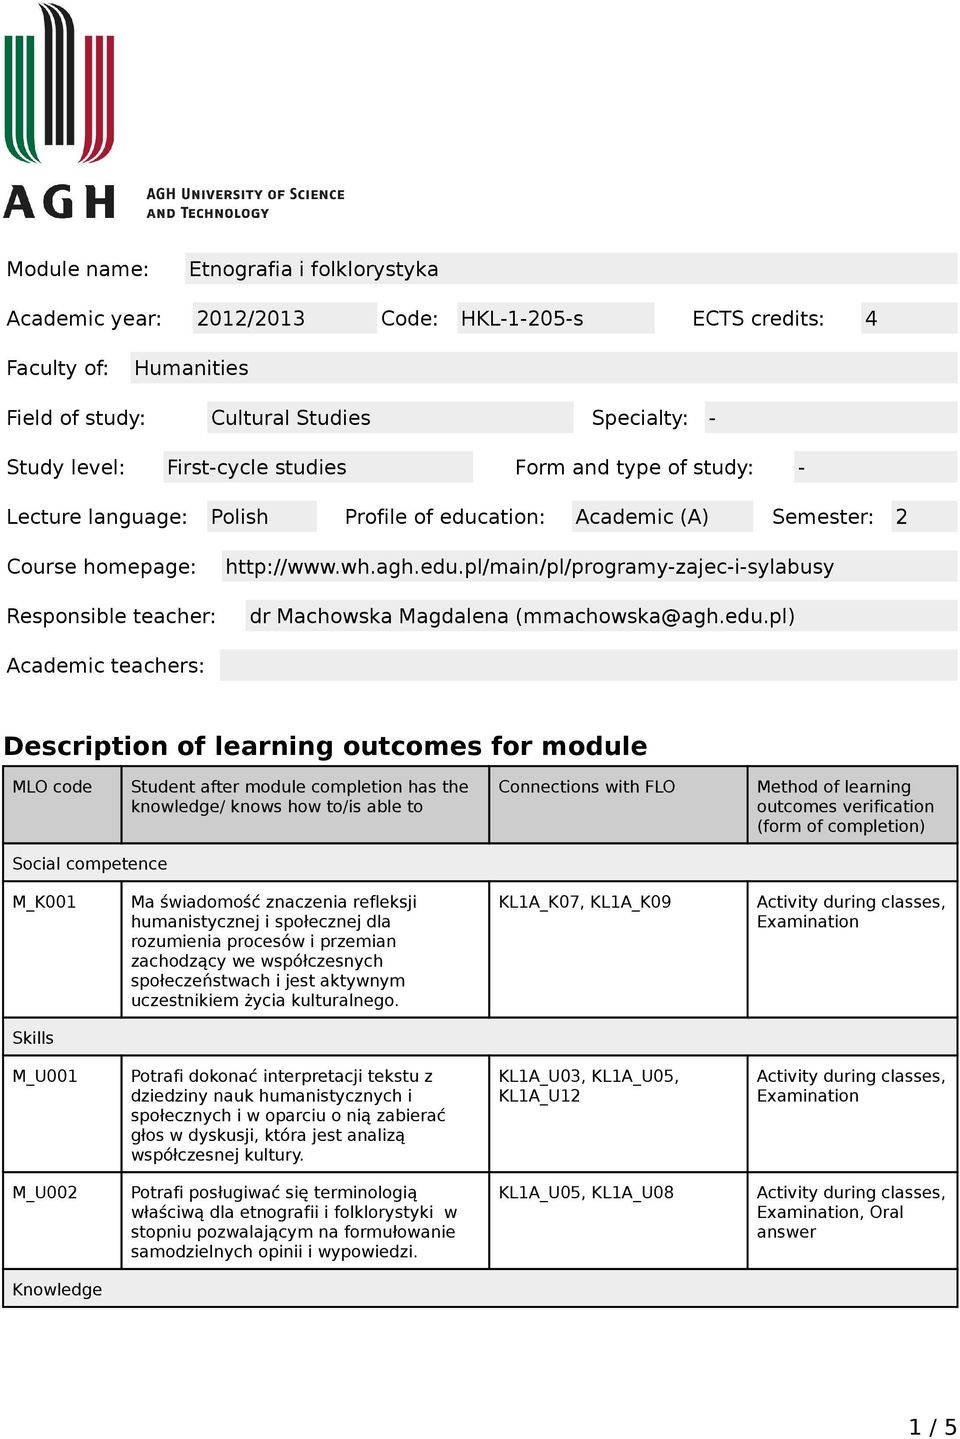 edu.pl) Academic teachers: Description of learning outcomes for module MLO code Student after module completion has the knowledge/ knows how to/is able to Connections with FLO Method of learning